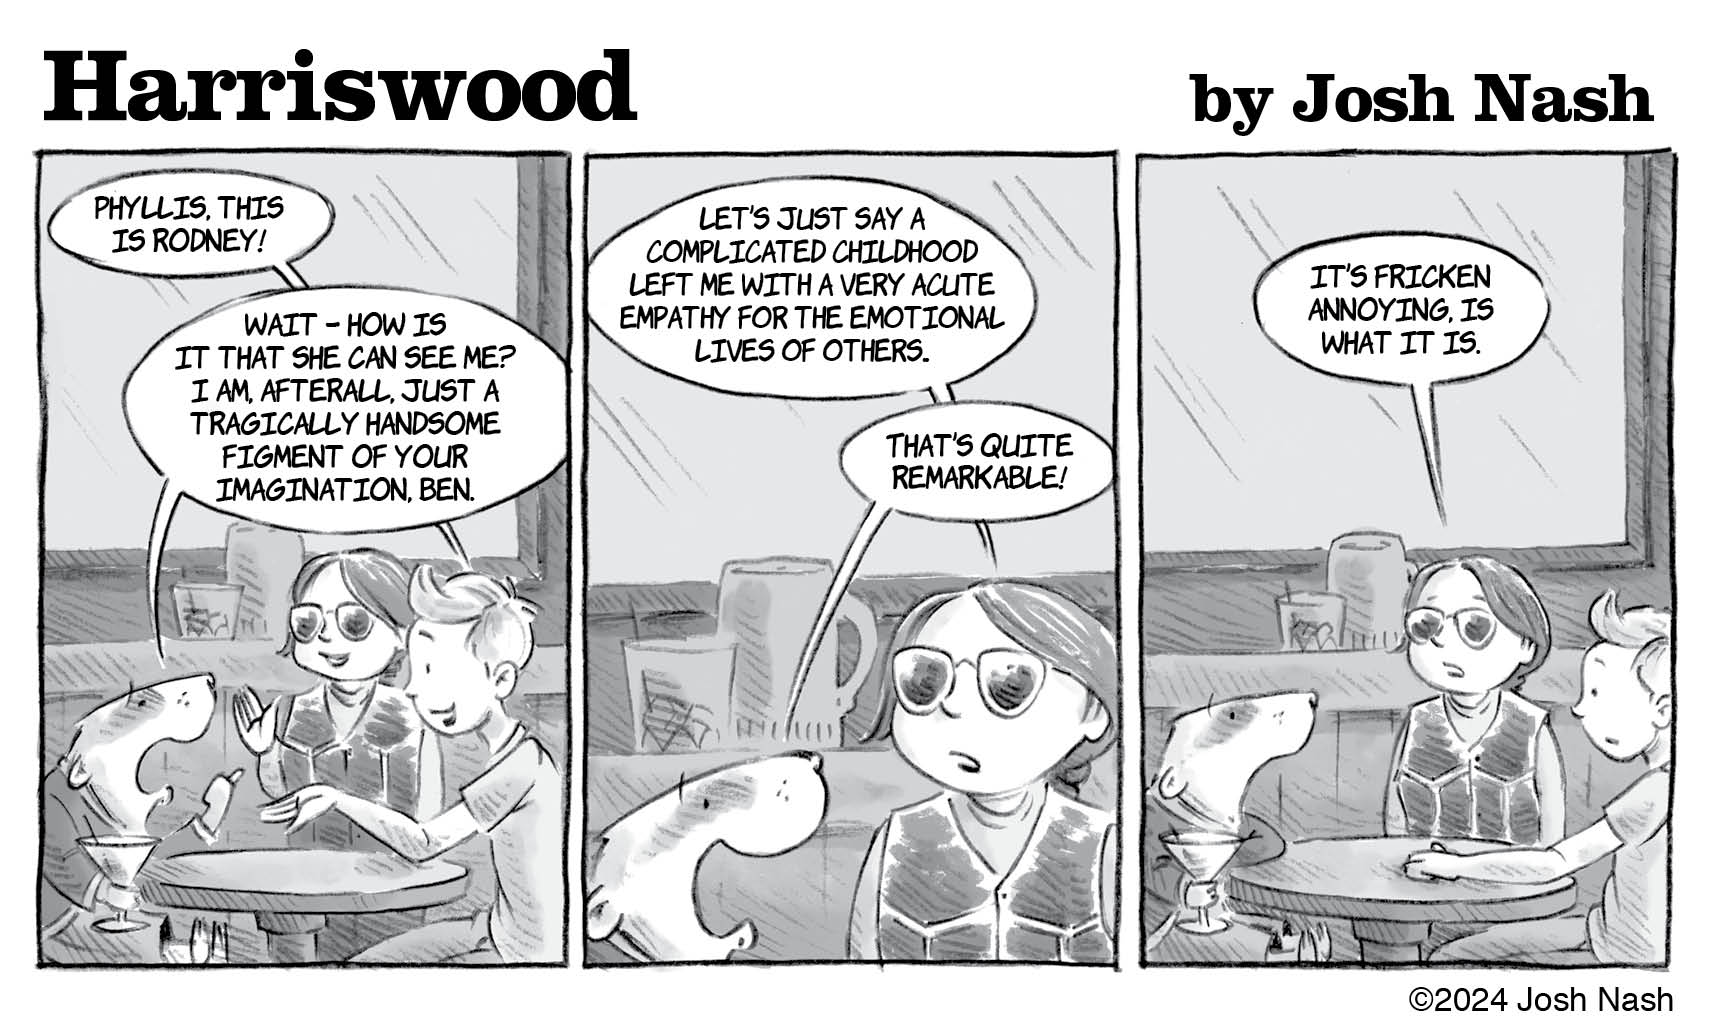 Harriswood Chapter 2, Episode 21